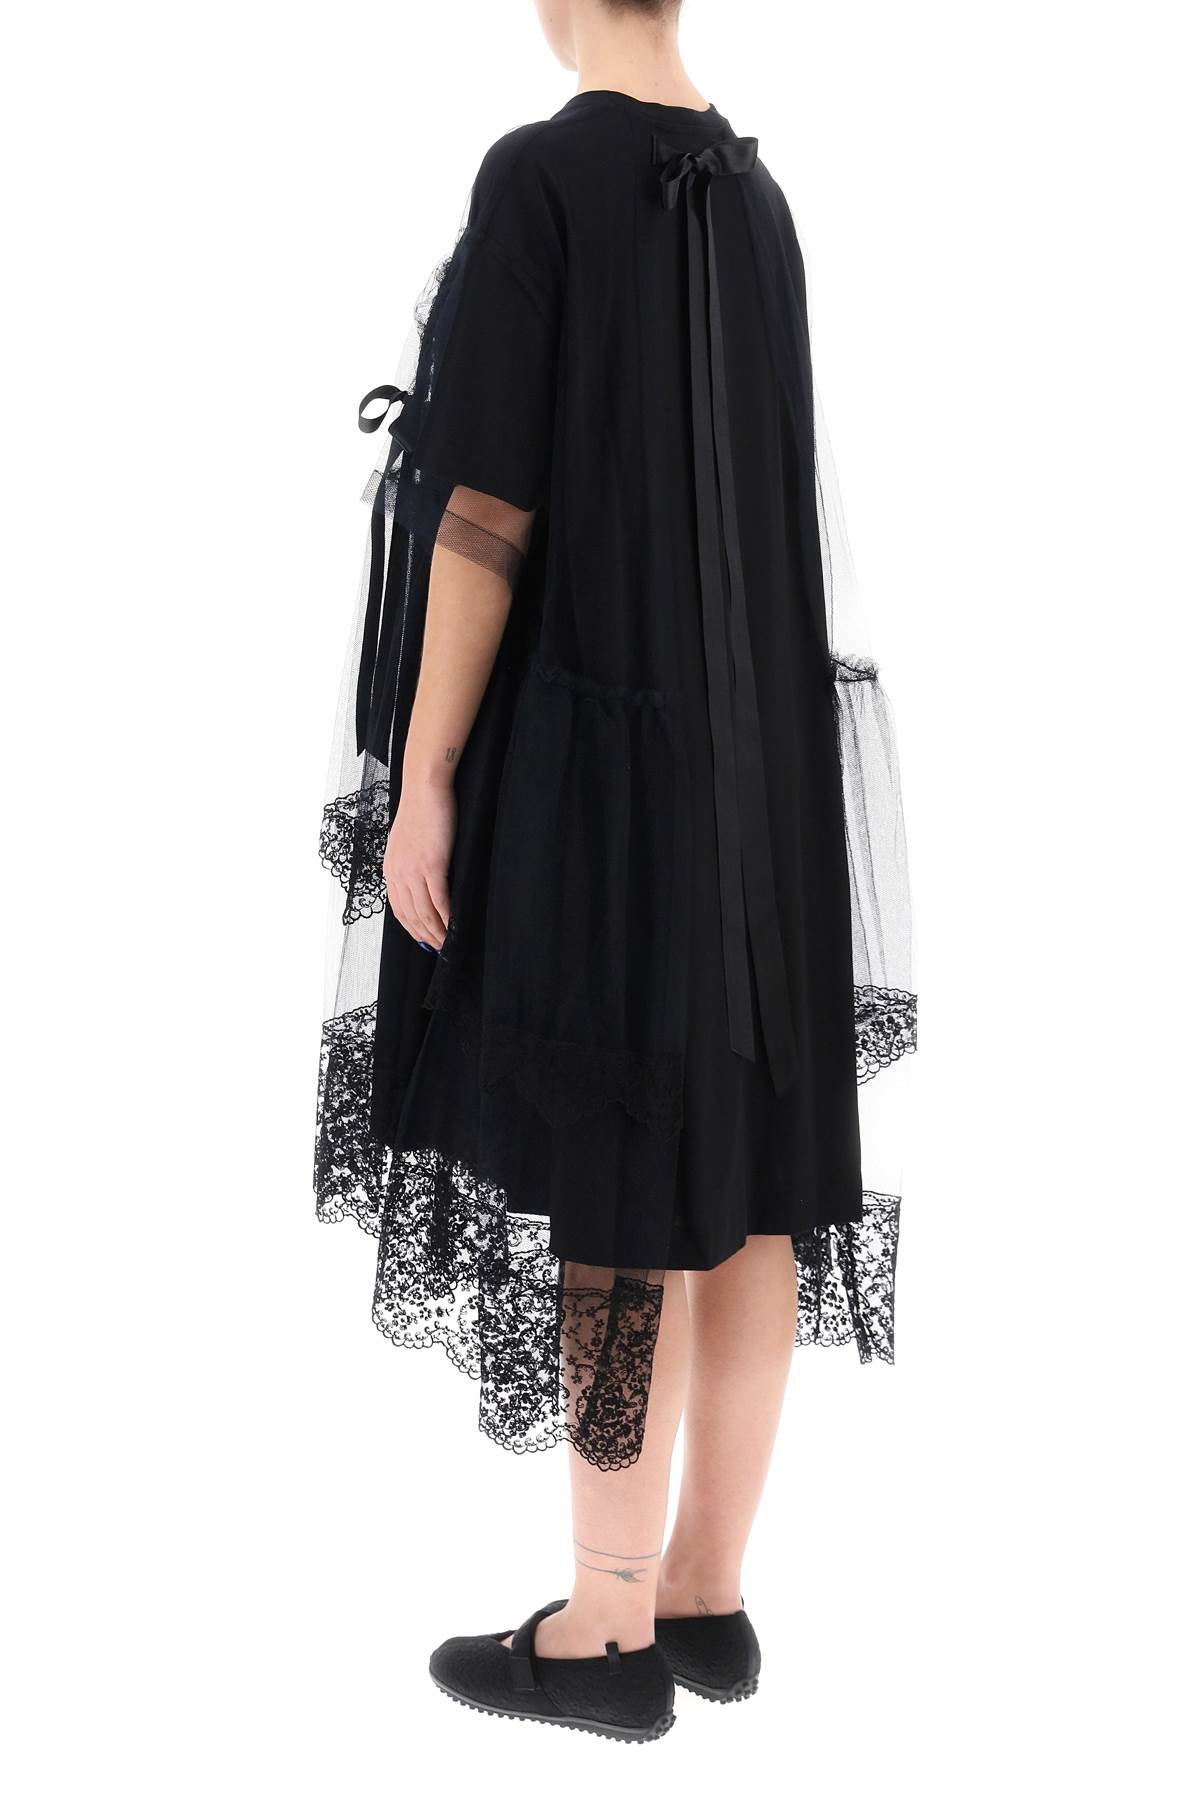 SIMONE ROCHA Sophisticated Black Midi Dress with Bow Accents